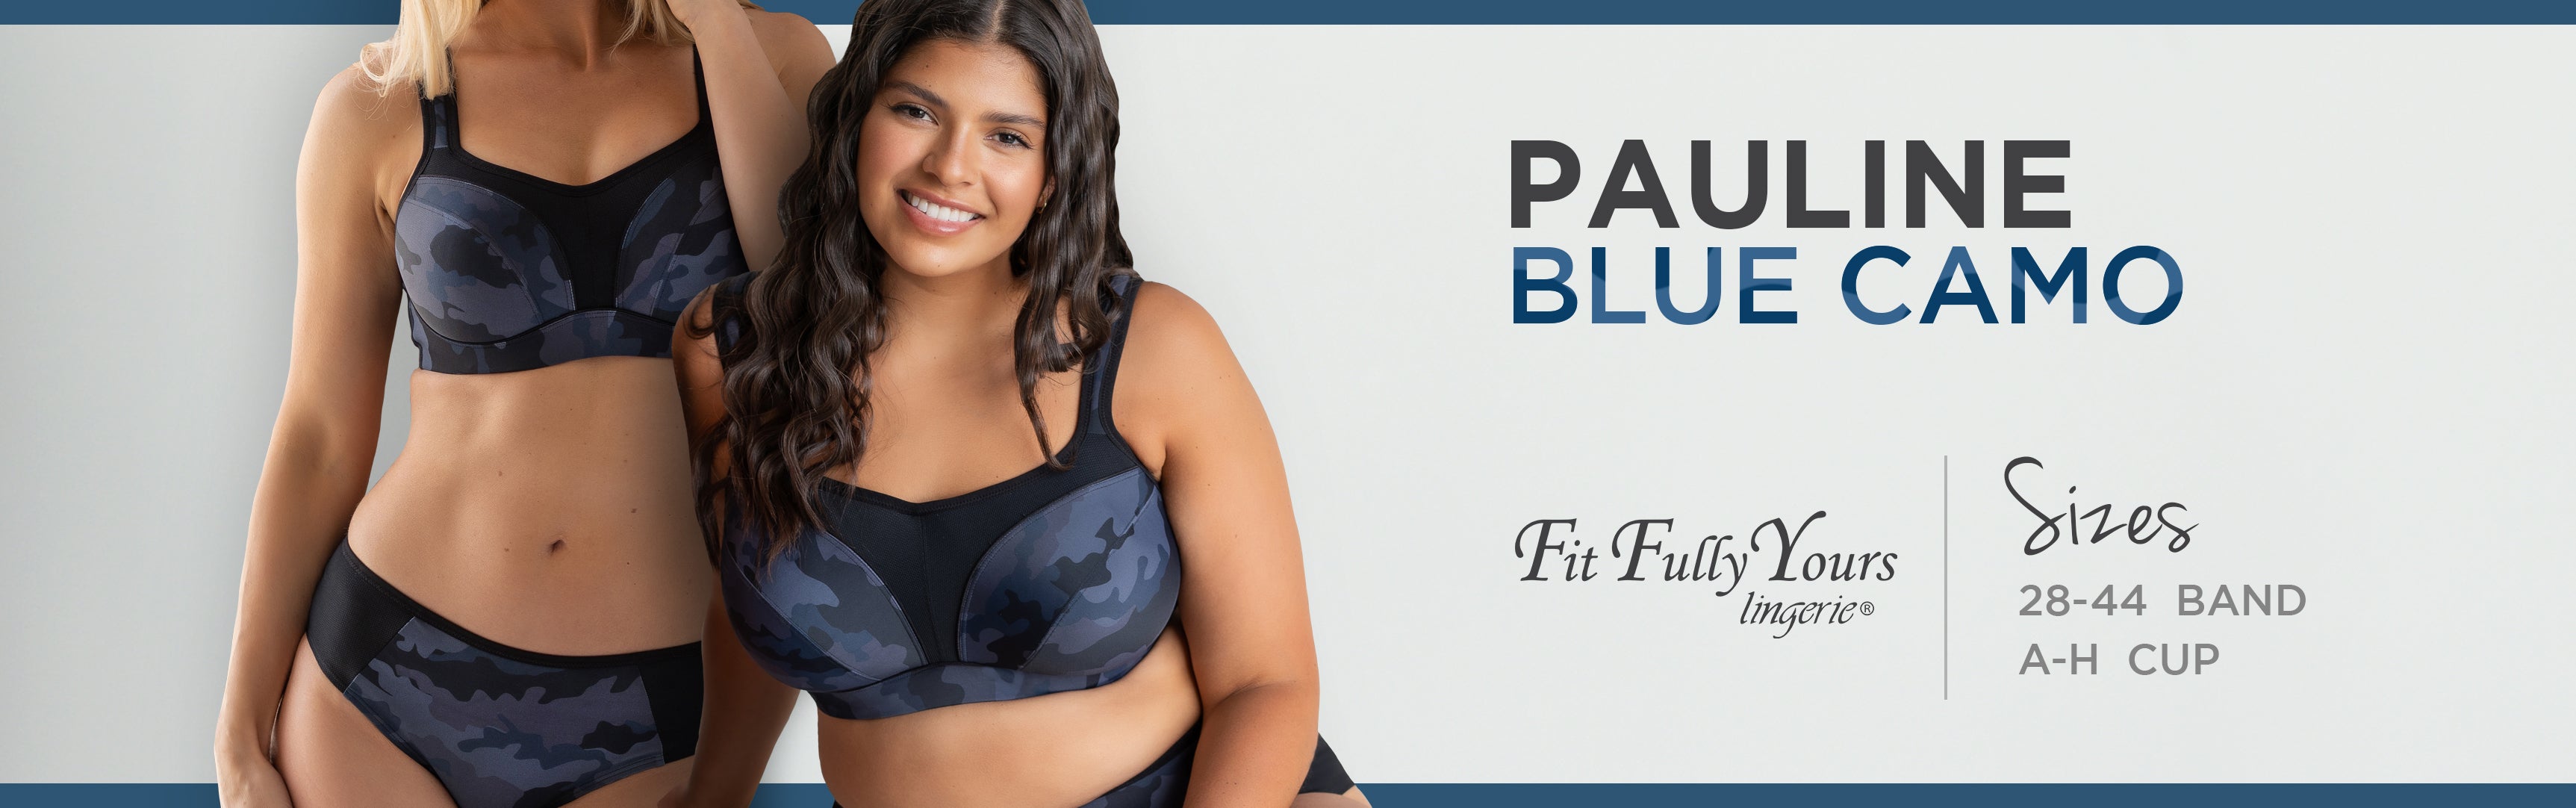 The Fitfully Yours - Vicanie's The Bra Fitting Specialists